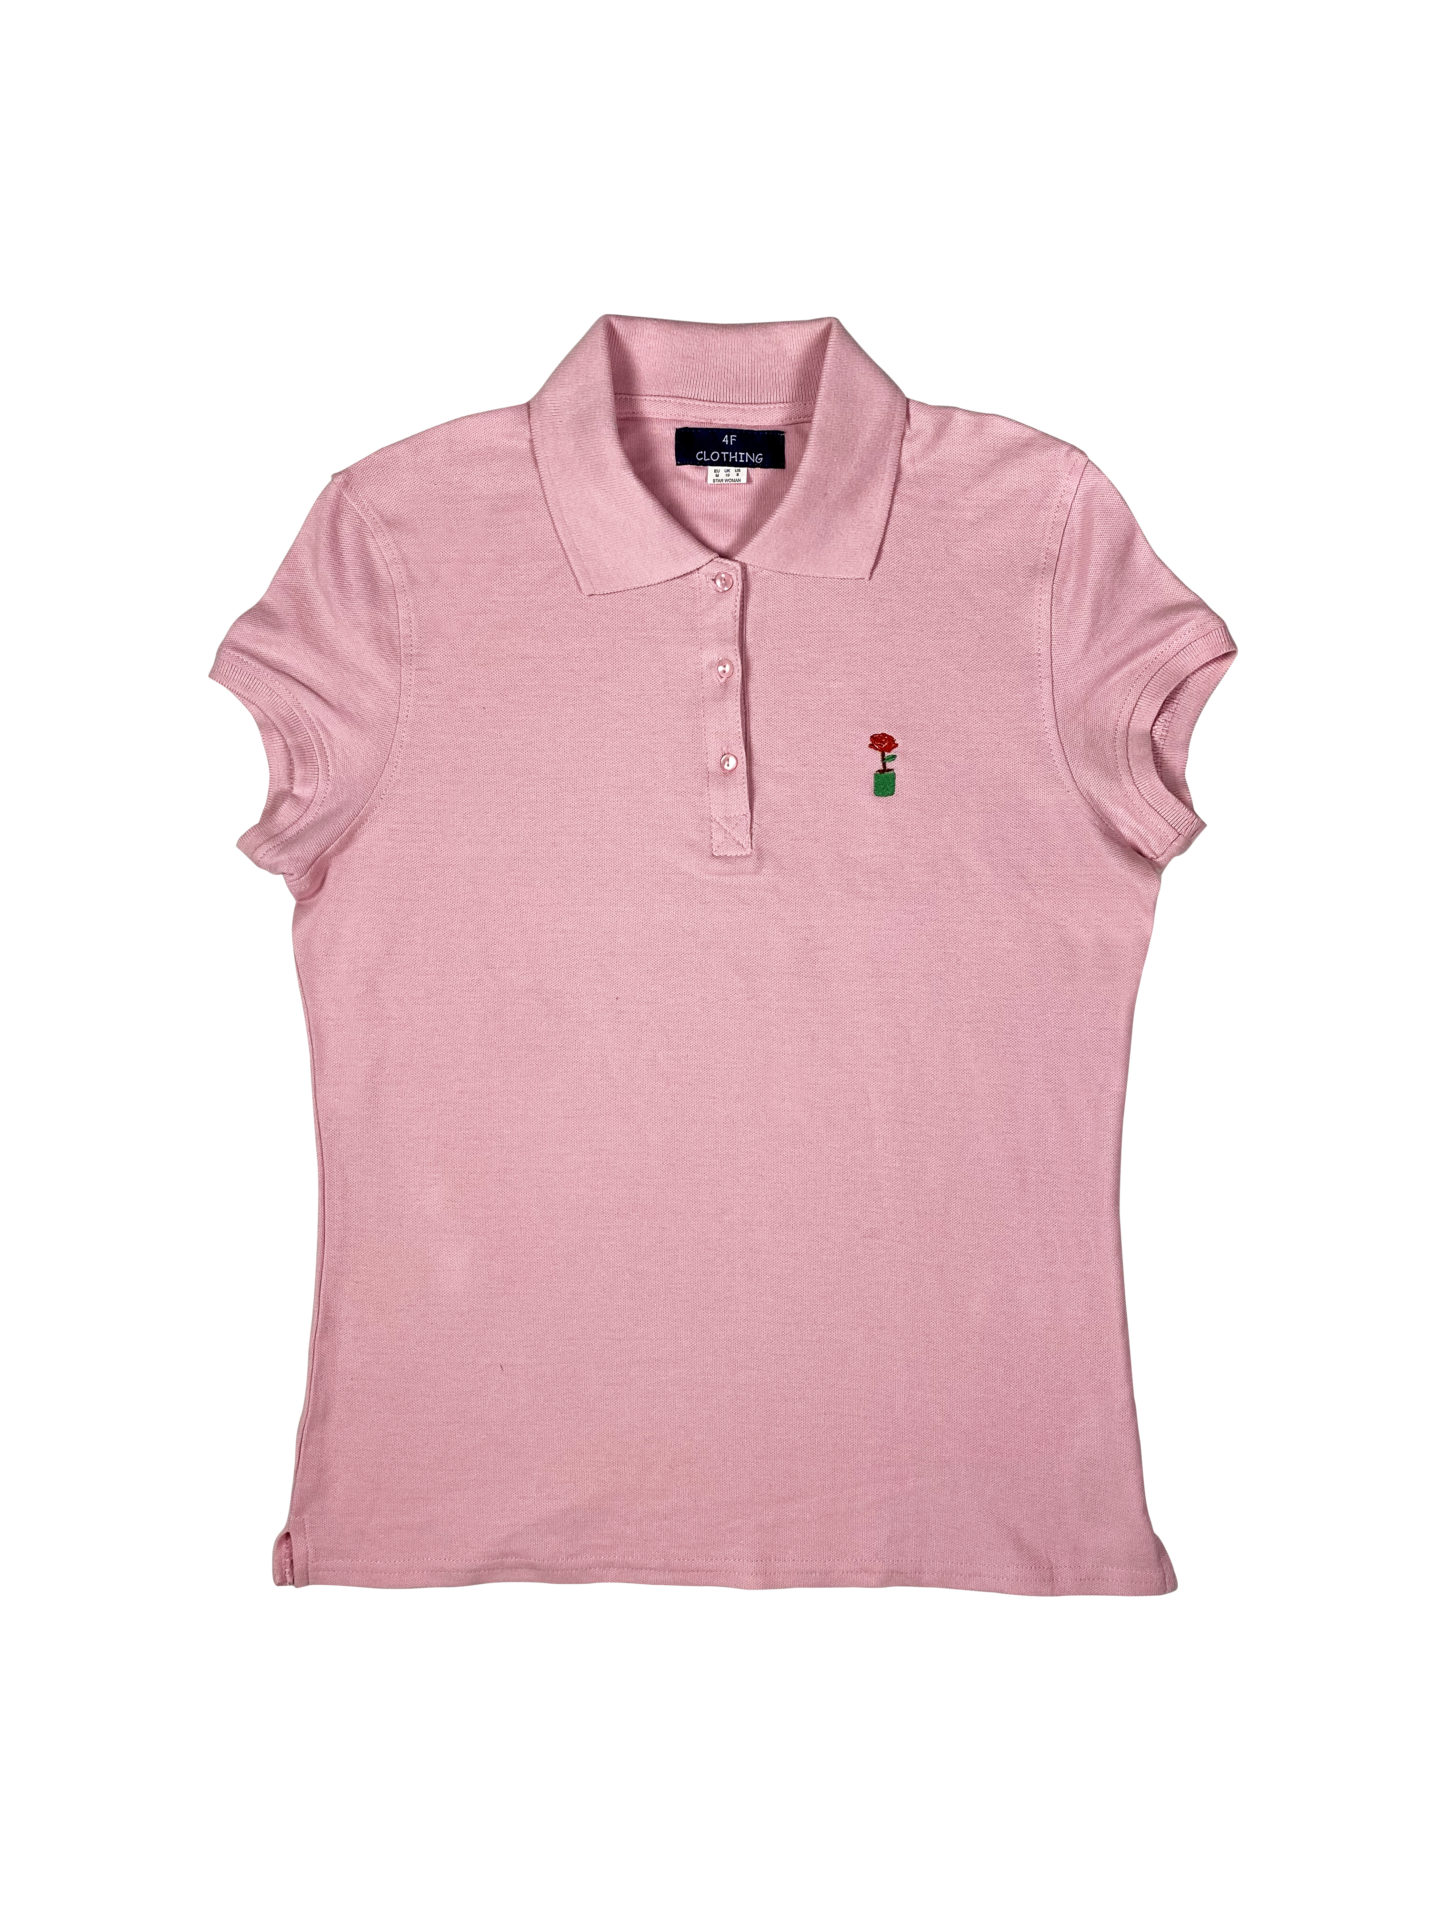 WOMEN'S PINK POLO SHIRT - 4fclothing